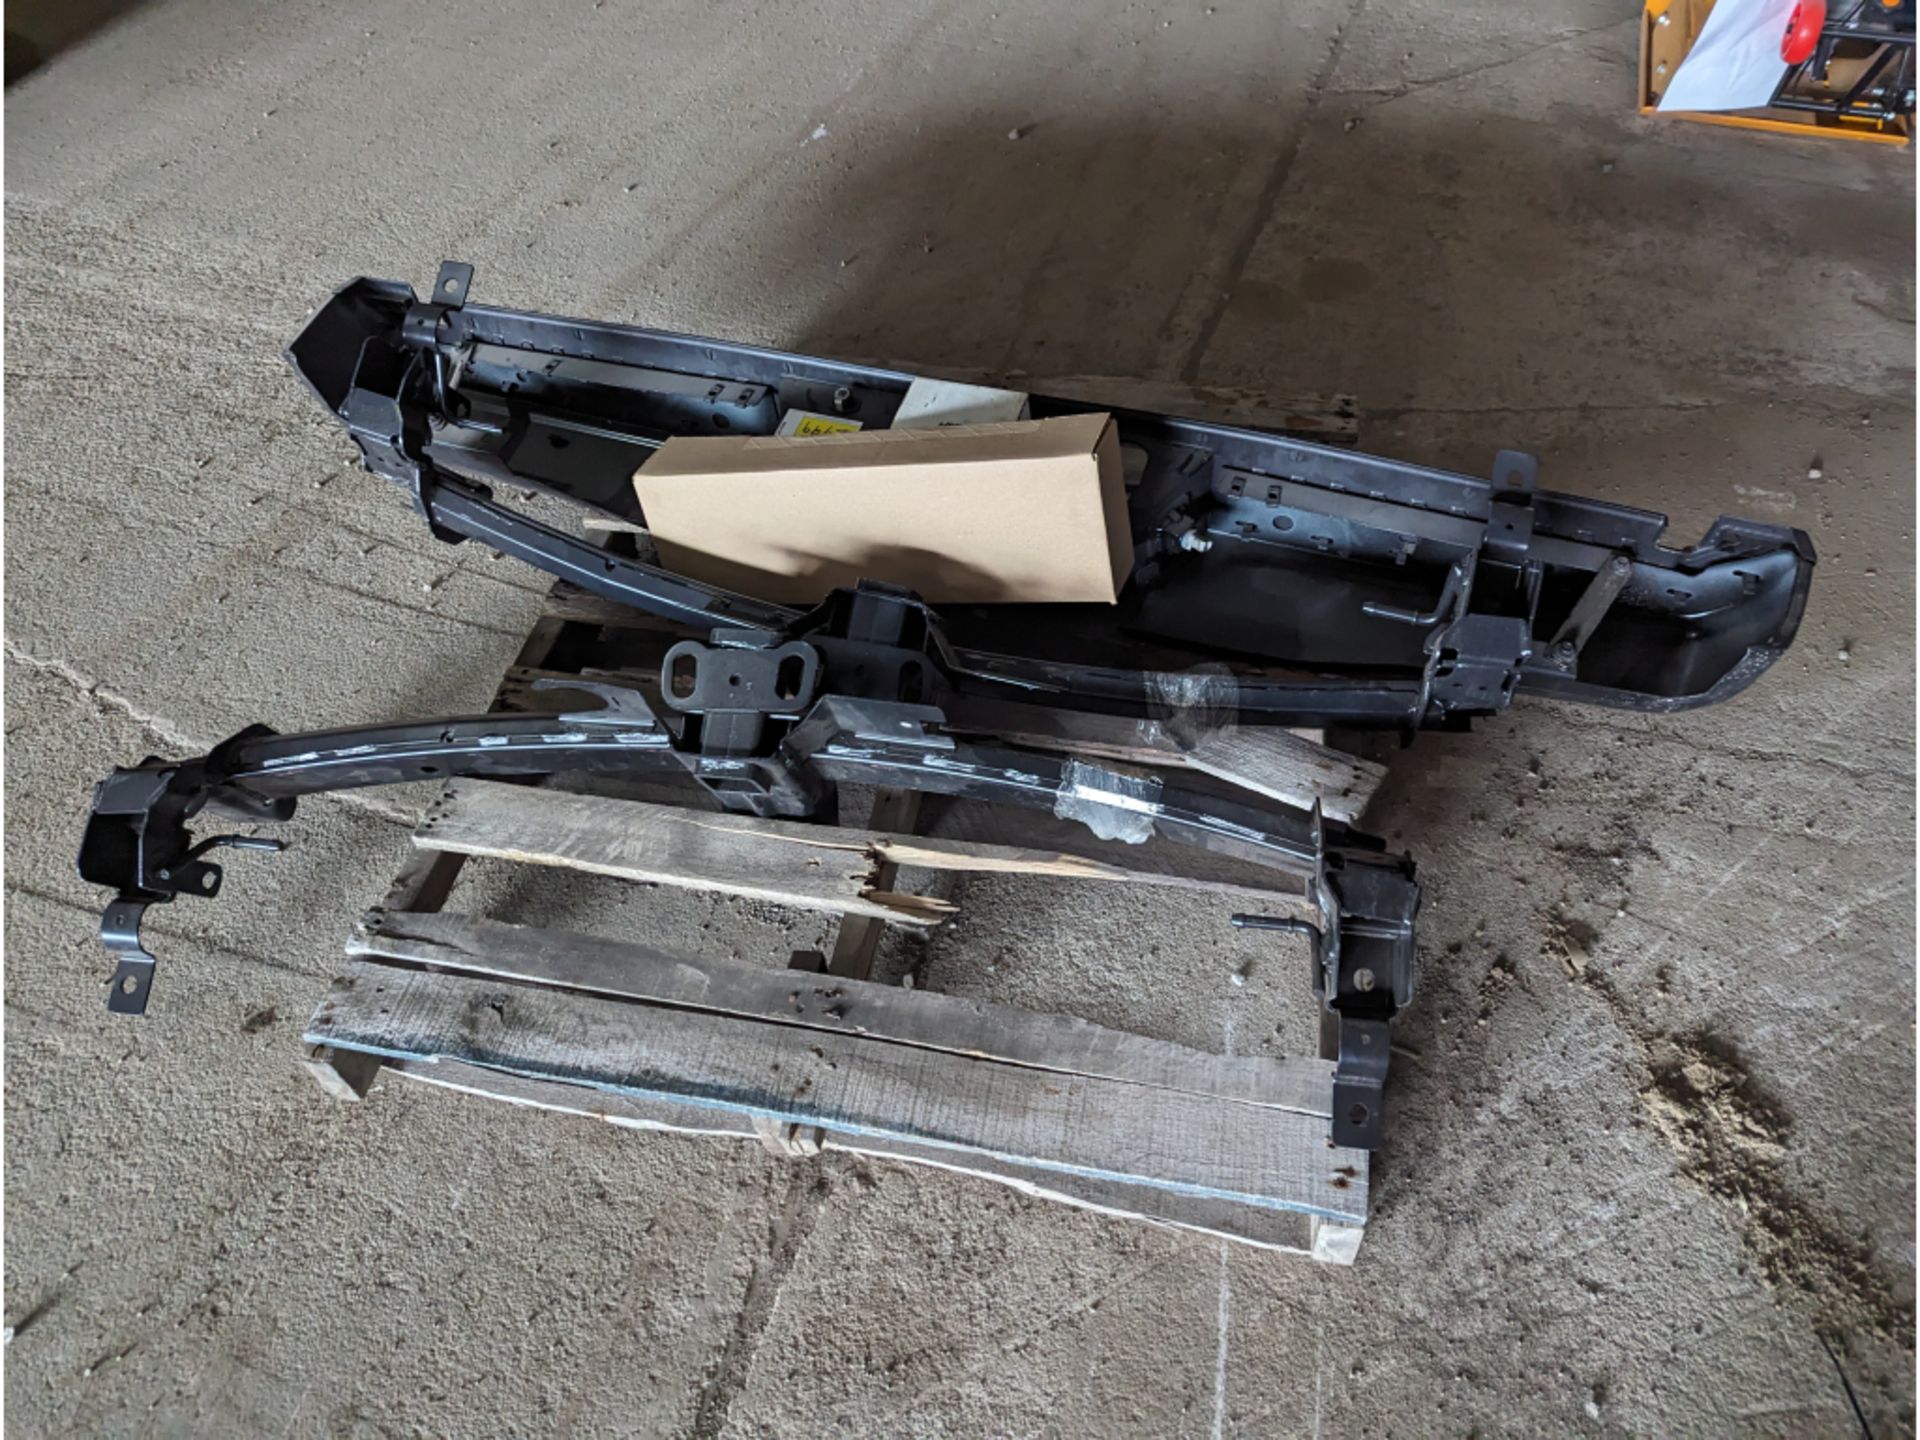 Ford F150 Bumper, Ford Explorer Hitches - Image 3 of 4